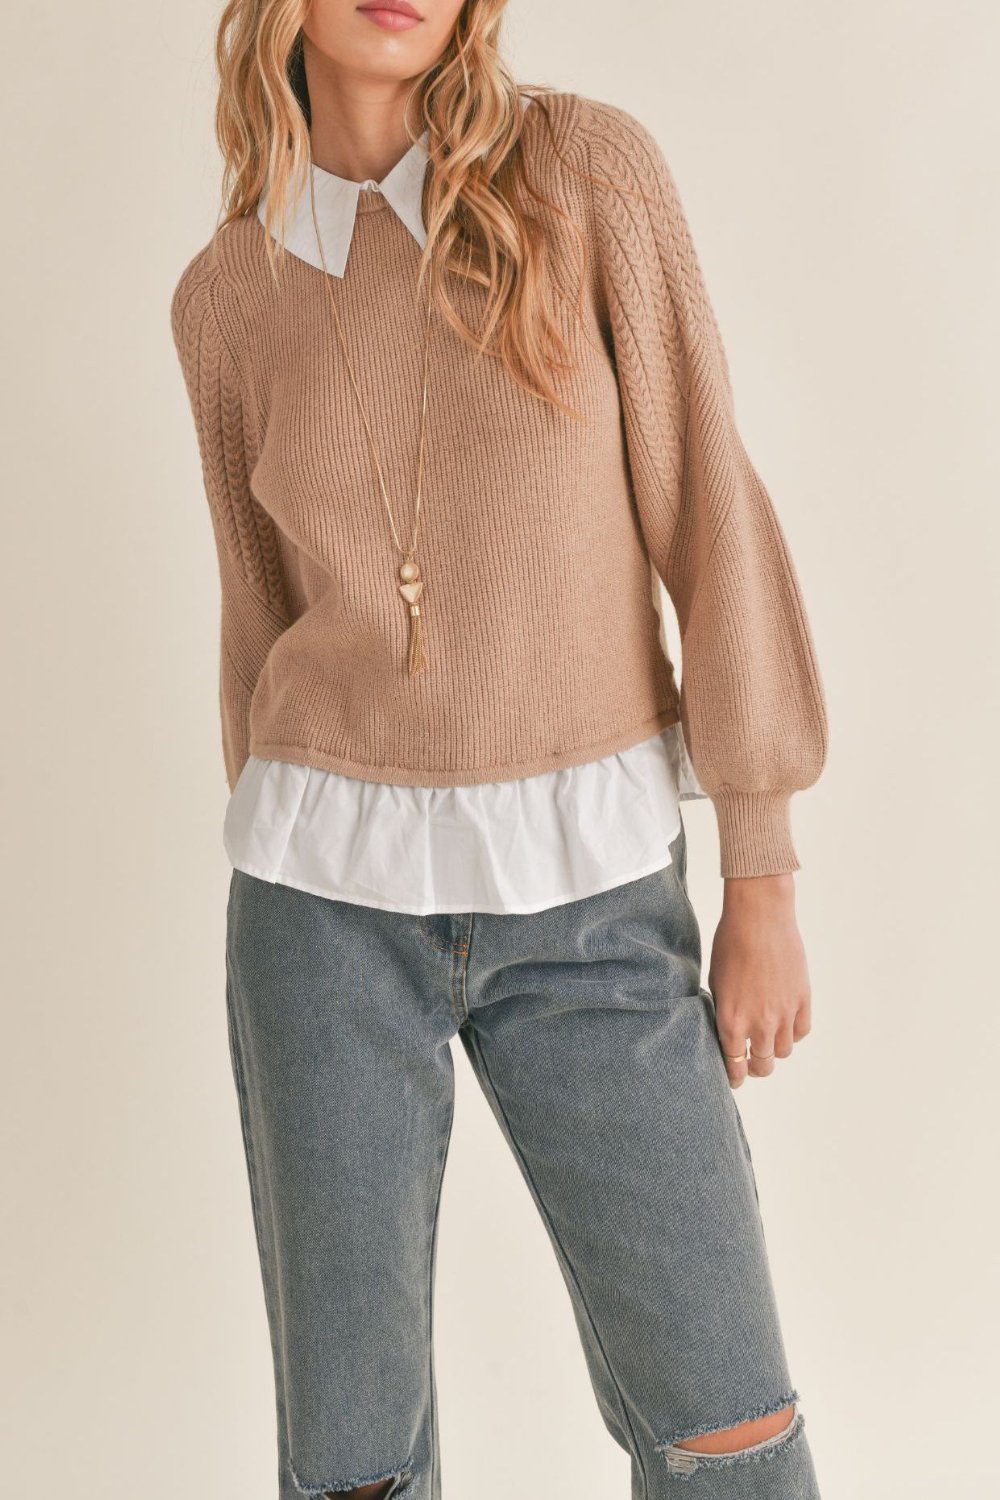 Women's Wednesday Layered Twofer Sweater Top | Tan - Women's Shirts & Tops - Blooming Daily